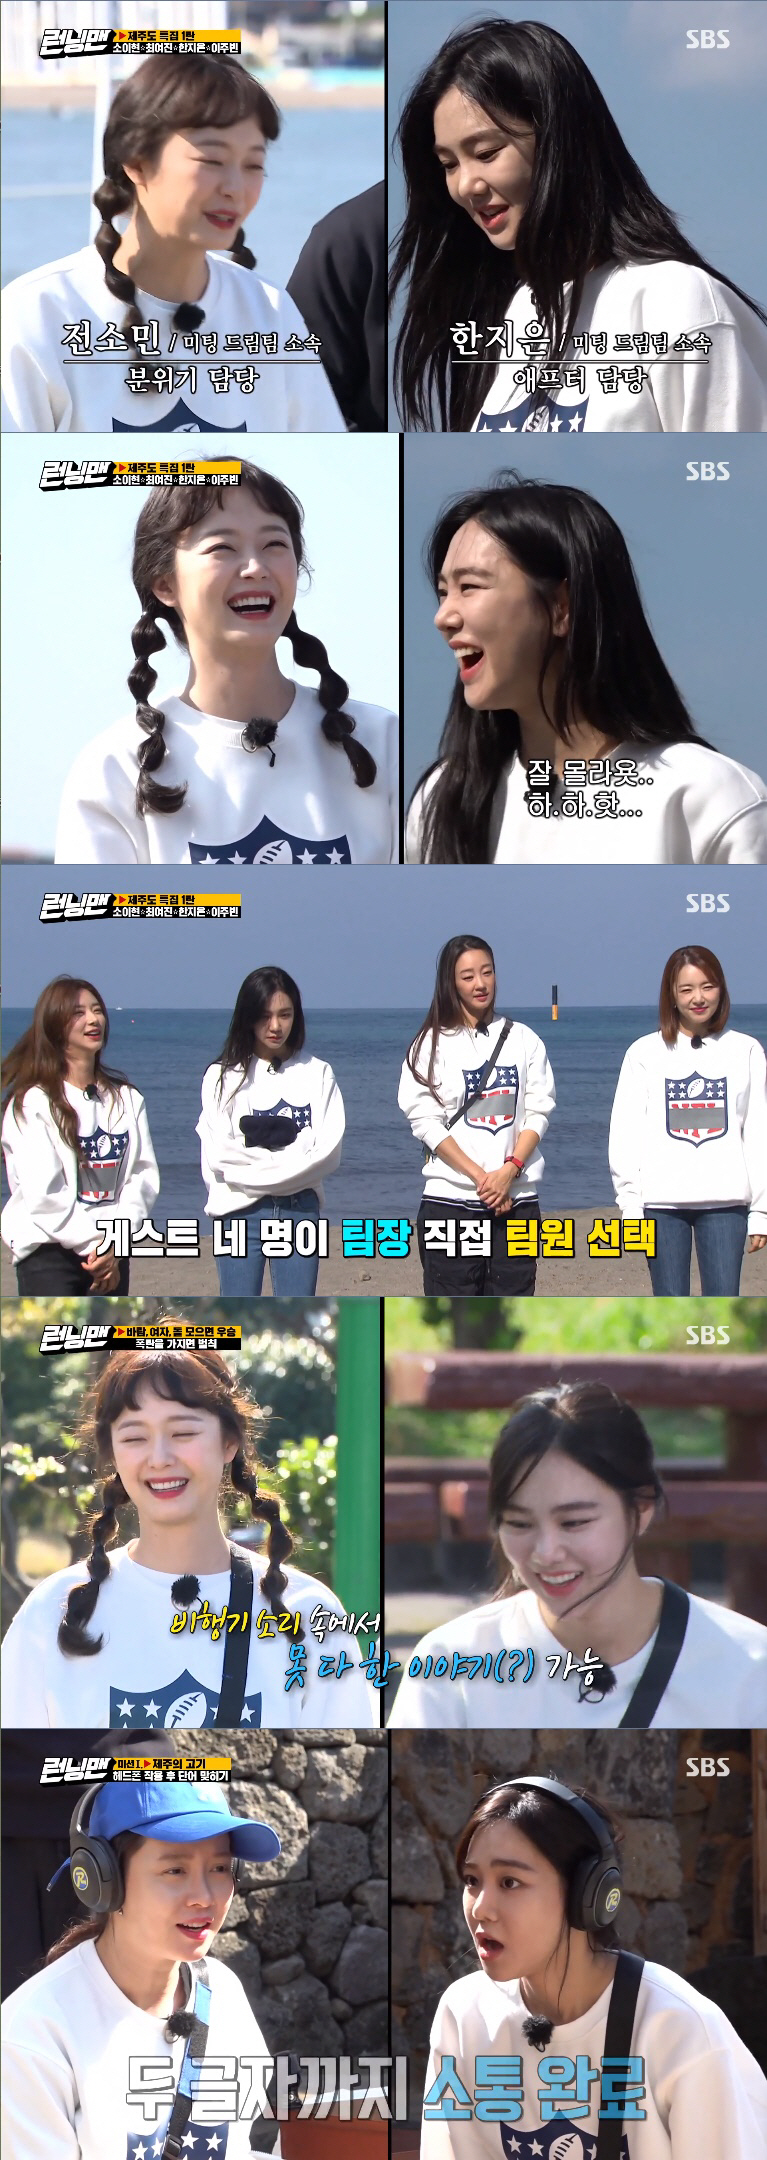 Actor Han Ji-eun has emanated the entertainment sense that he has hidden.In SBS Running Man broadcasted on the 1st, Soi Hyun, Choi Ji Jin, Han Ji-eun and Lee Ju-bin were featured as guests on Jeju Island.Han Ji-eun, who announced his name as Melos constitution, revealed that he was a college motive with Jeon So-min, but said he did not know I do not know.I also have a memory of Han Ji-eun, but its not clear, but its not original (the relationship) clean, said Jeon So-min.Jeon So-min then said, I became a little vague about Friends reasoning issues, which baffled Han Ji-eun.Han Ji-eun said, I do not know how far I should say that entertainment is the first time. It is a memory that was the meeting The Dream Team.Jeon So-min said, I had a builder there. I thought it. If you put the atmosphere in the meeting hard before, after told me that someone else had received it.That was Han Ji-eun, he said, laughing.Running Man members encouraged Han Ji-eun to tell more about Jeon So-min.On the move, Han Ji-eun said to Hahas interstitial and encouraging What Somin told me, what can I do?They said I like it, he said. The direct relationship with Somin seems to be a sense of damage to me. He laughed at the appearance of entertainment Odintsovo.They also started the game Tell the Word After Wearing Headphones: Han Ji-euns entertainment felt glowing here too.Han Ji-eun continued his one-dimensional explanation of numb as thick flesh or lapper name is good, but this is good and made the members laugh.Han Ji-eun also explained his charm and showed his real charm, and he caught his eye with his fantastic chemistry with Ji Suk-jin - Song Ji-hyo.Han Ji-eun, who then met again with Jeon So-min, did not meet his eyes with awkwardness.Han Ji-eun said, I did what I told you to do because it was the first time, he said. I tried to save you on purpose.I dont know what it is, but thank you, said Jeon So-min, who heard Han Ji-euns story, I dont have a problem with Ji-eun.Friends had problems, he said, disclosure the real name of the motive.Han Ji-eun also added, Do not swear my friend, and added a smile with a sense of entertainment, and added to the expectation of entertainment activities afterward.